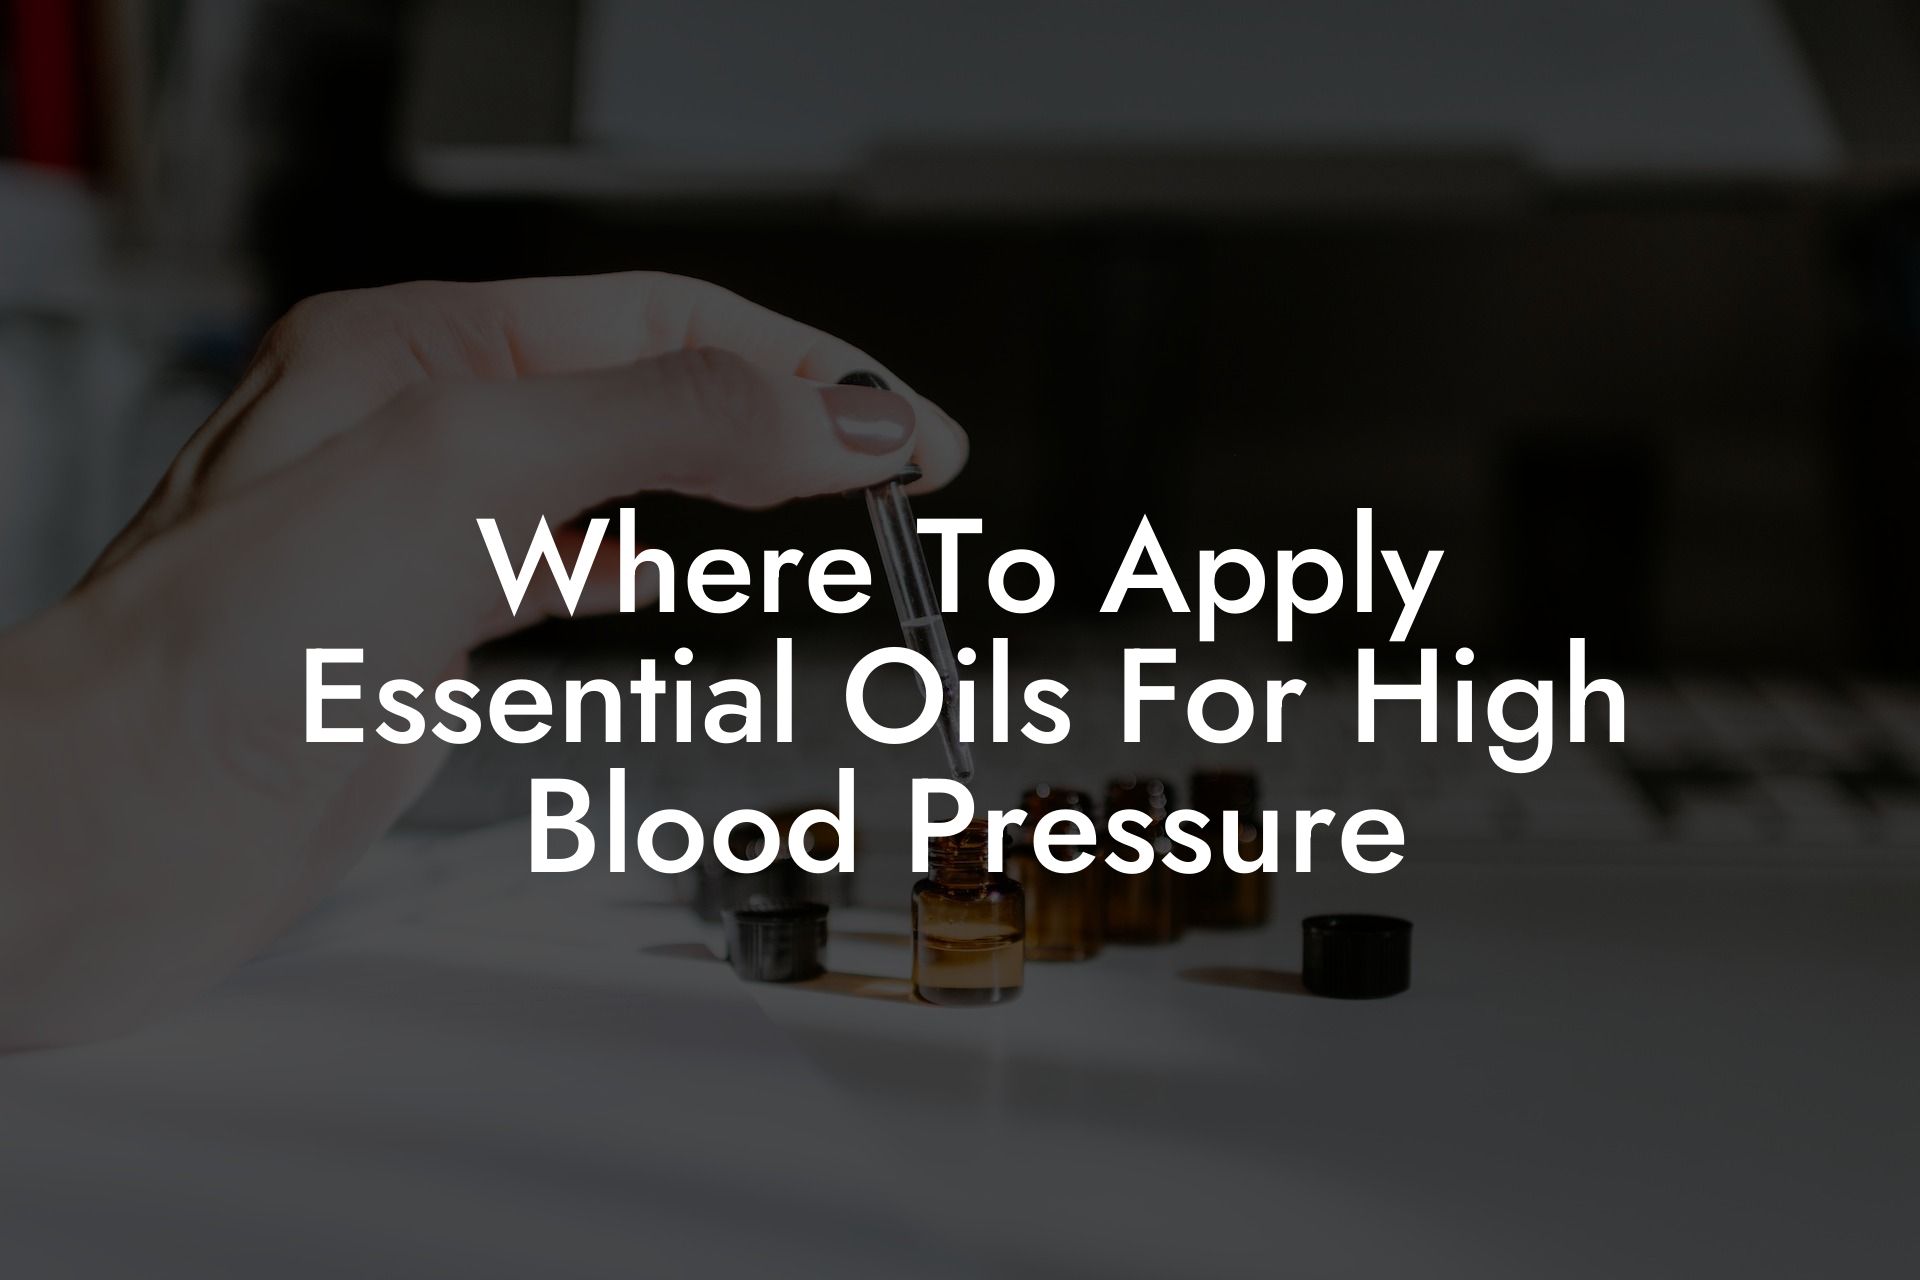 Where To Apply Essential Oils For High Blood Pressure